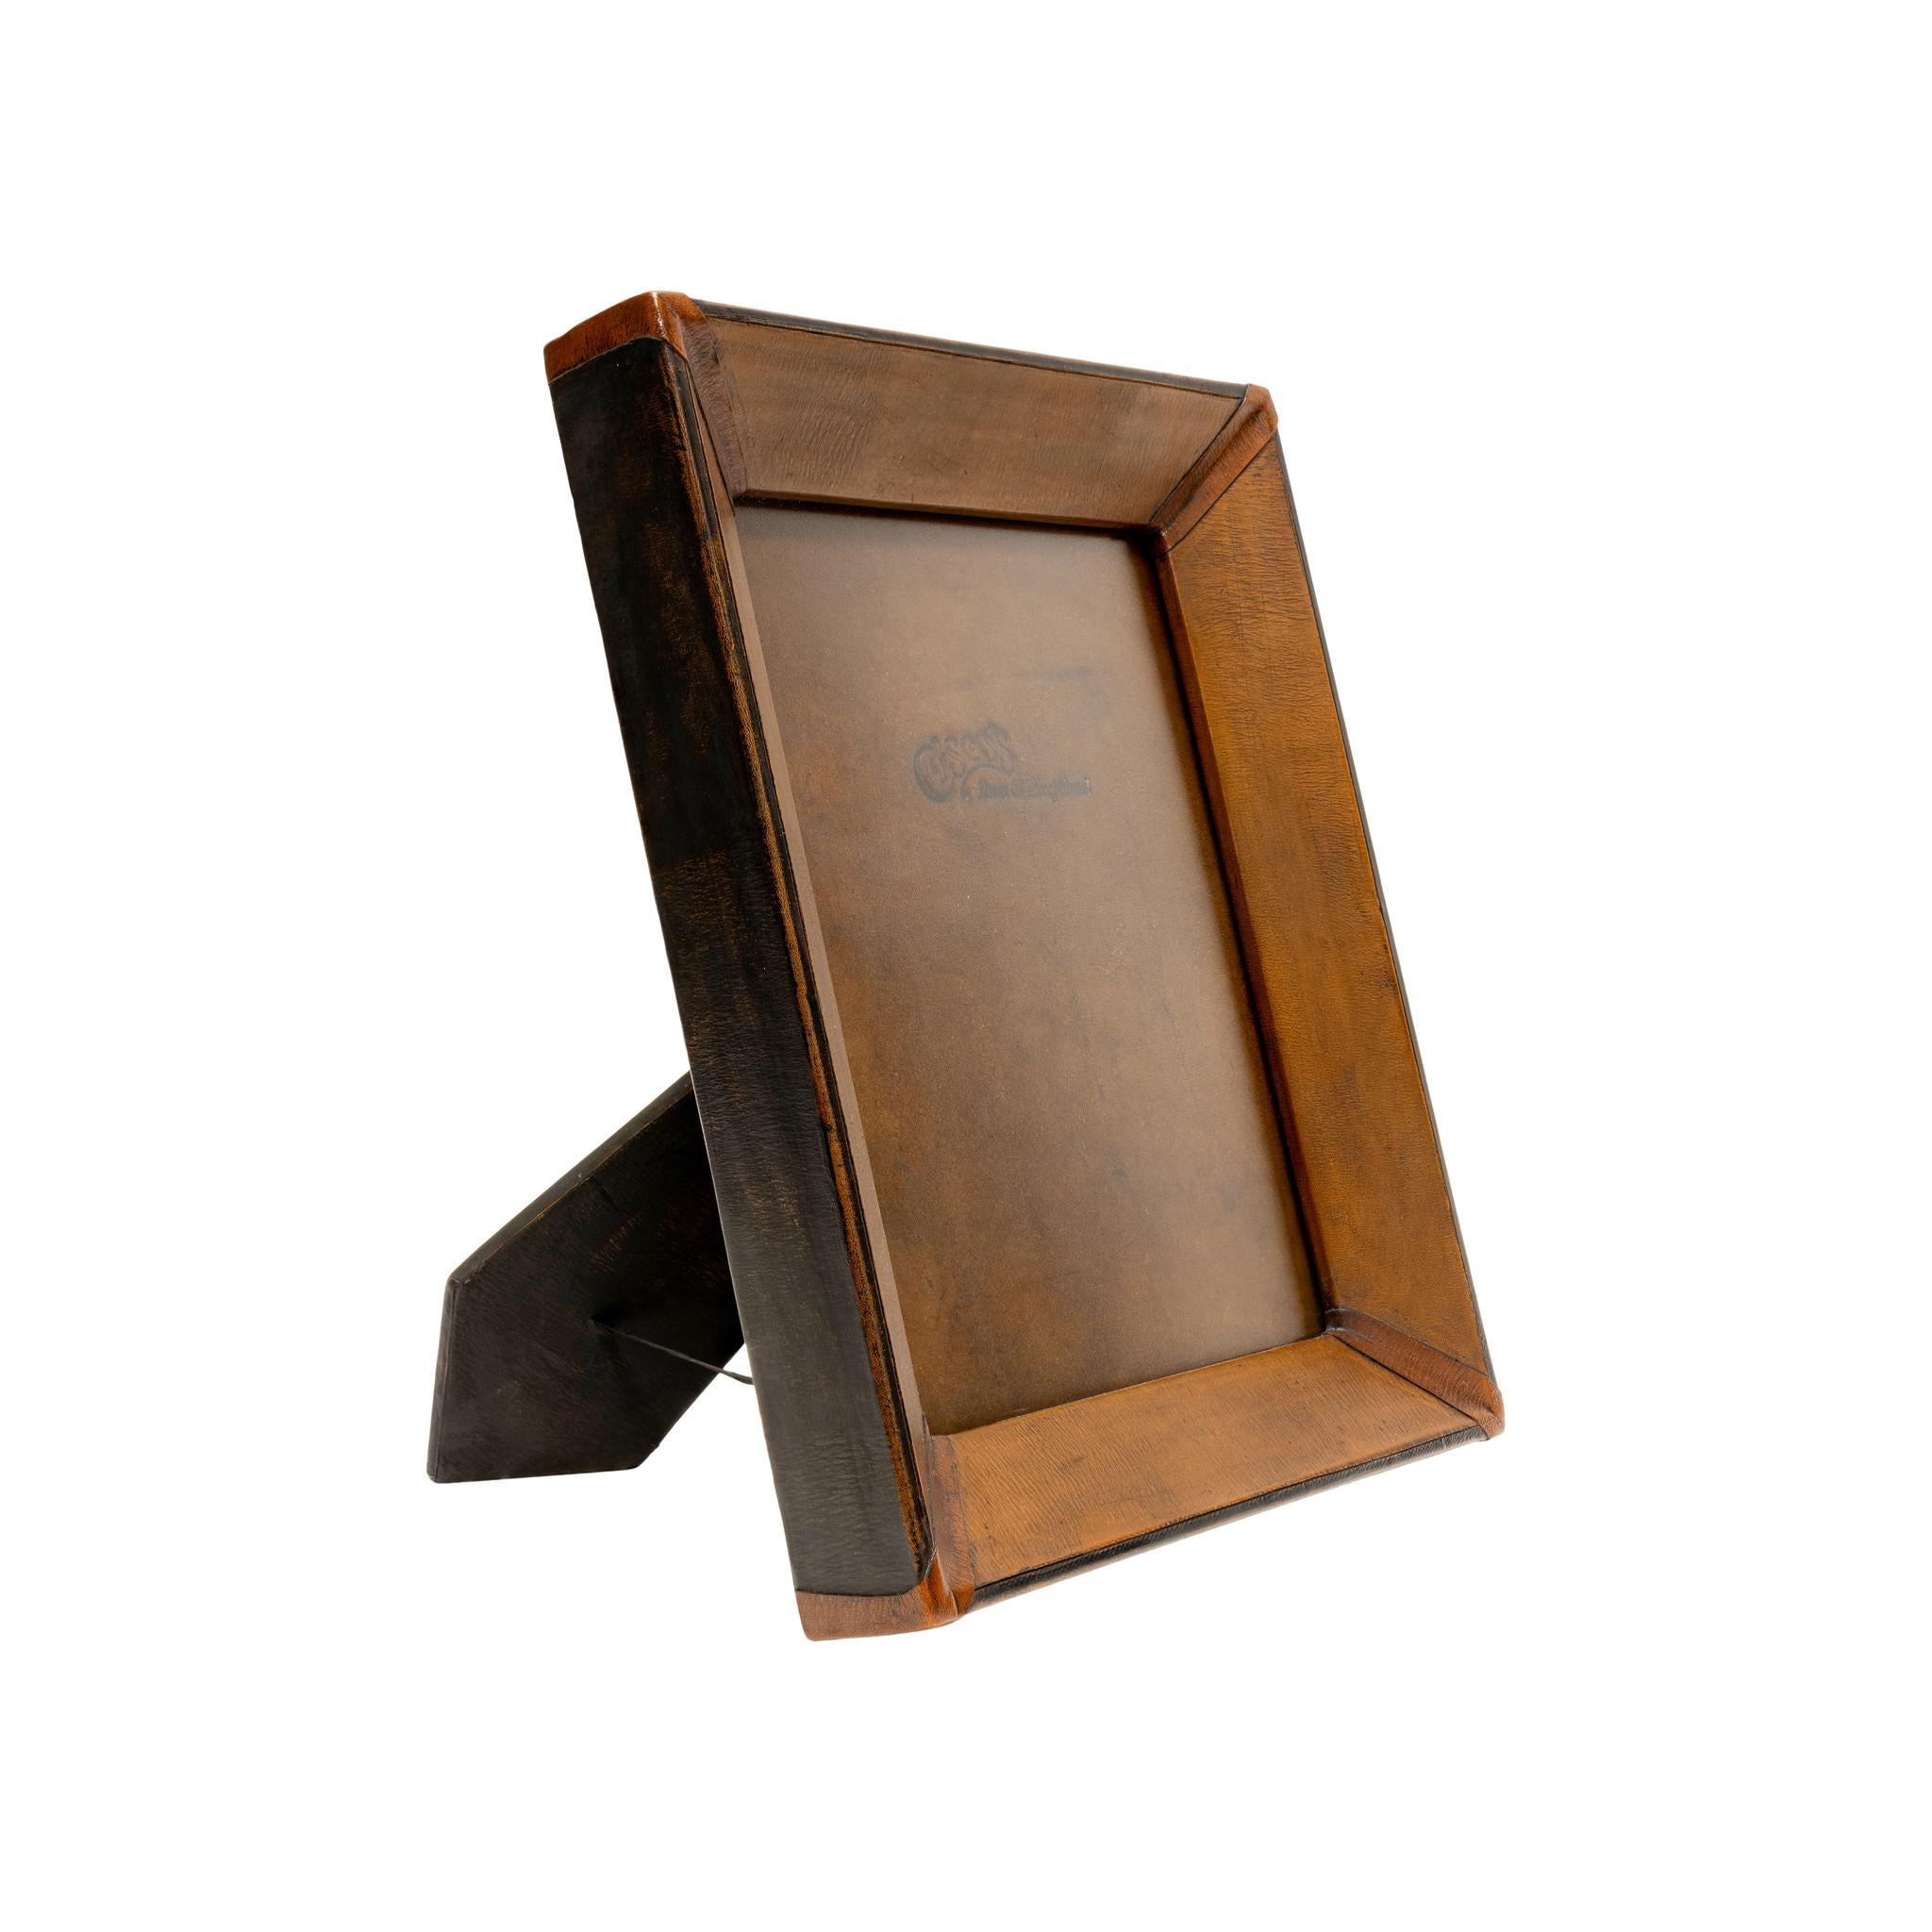 8x10 Medium Brown & Black Leather Tabletop Picture Frame- The Saddle Shop  In New Condition For Sale In Coeur d'Alene, ID